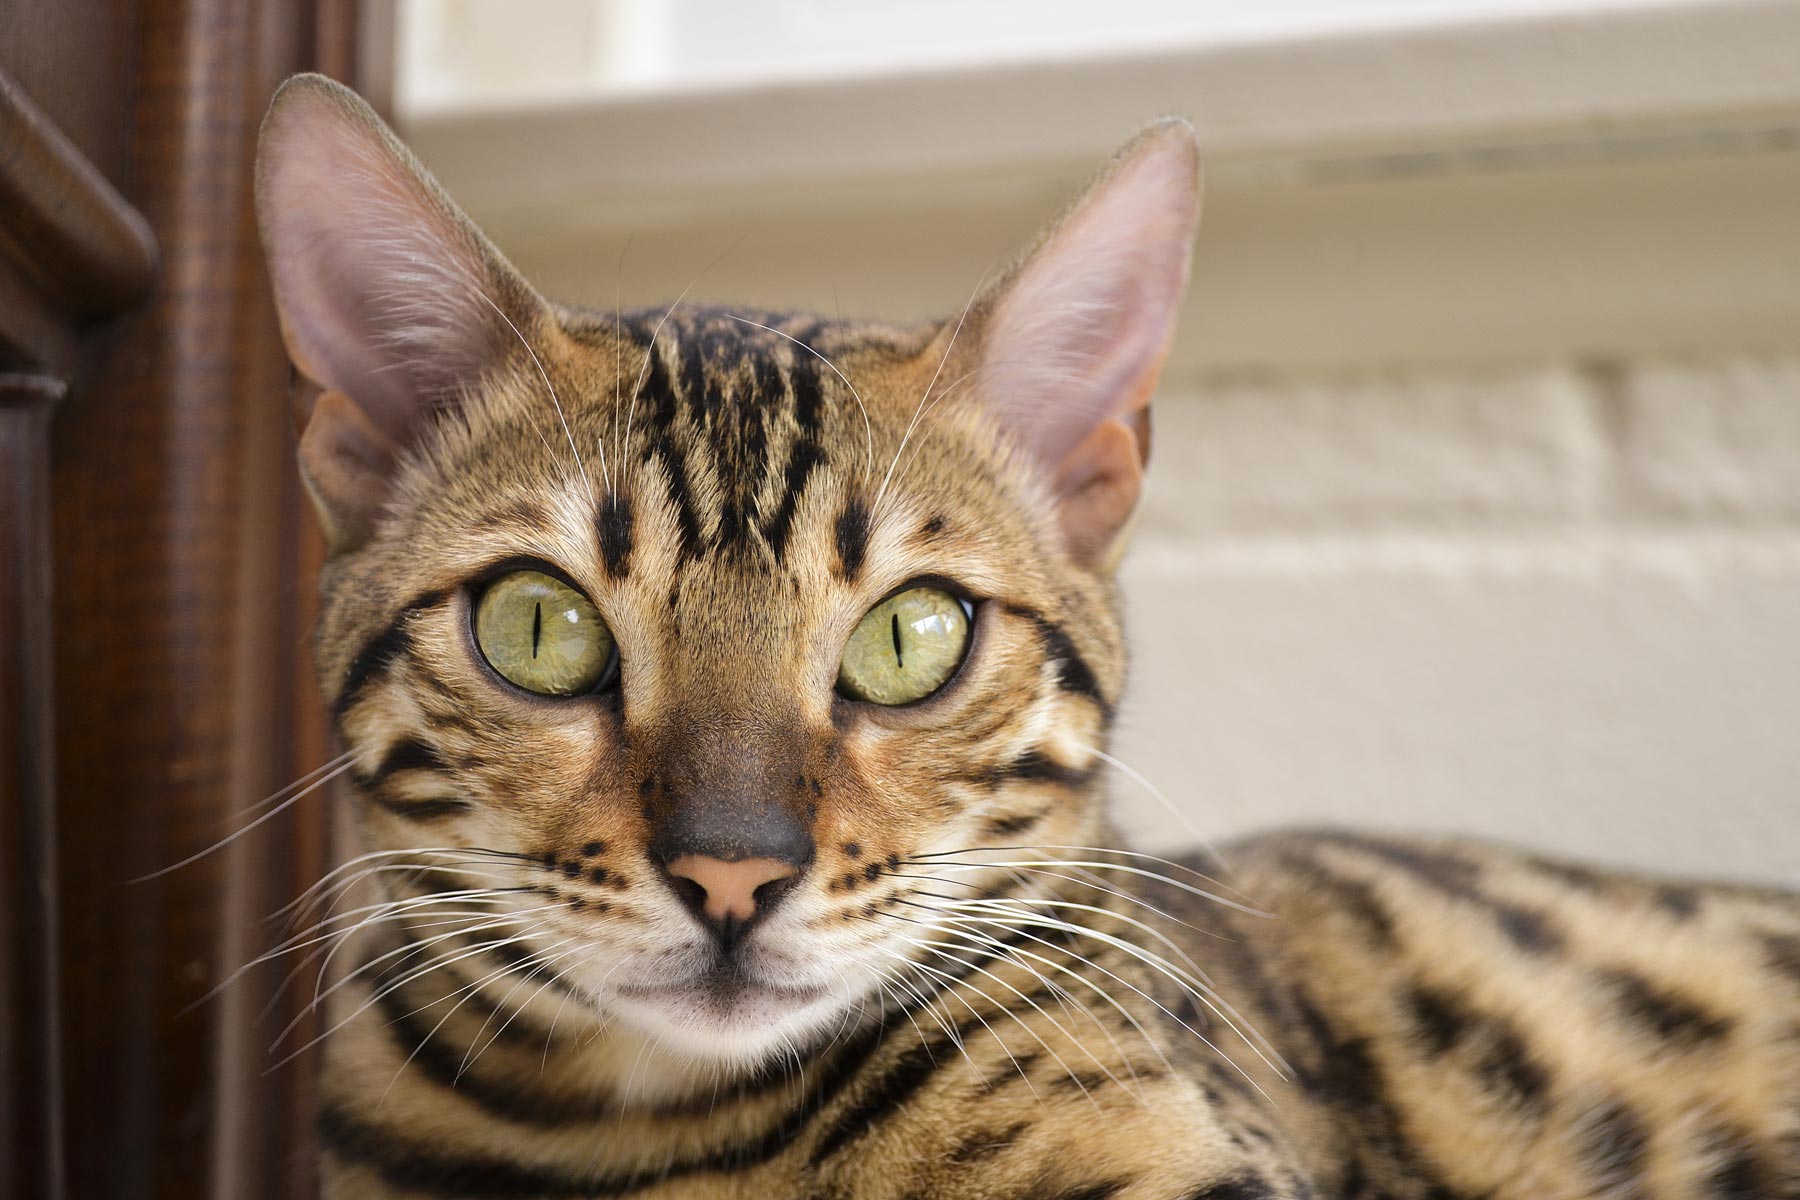 How Can One Find The Bengal Kittens For Sale Near Me?